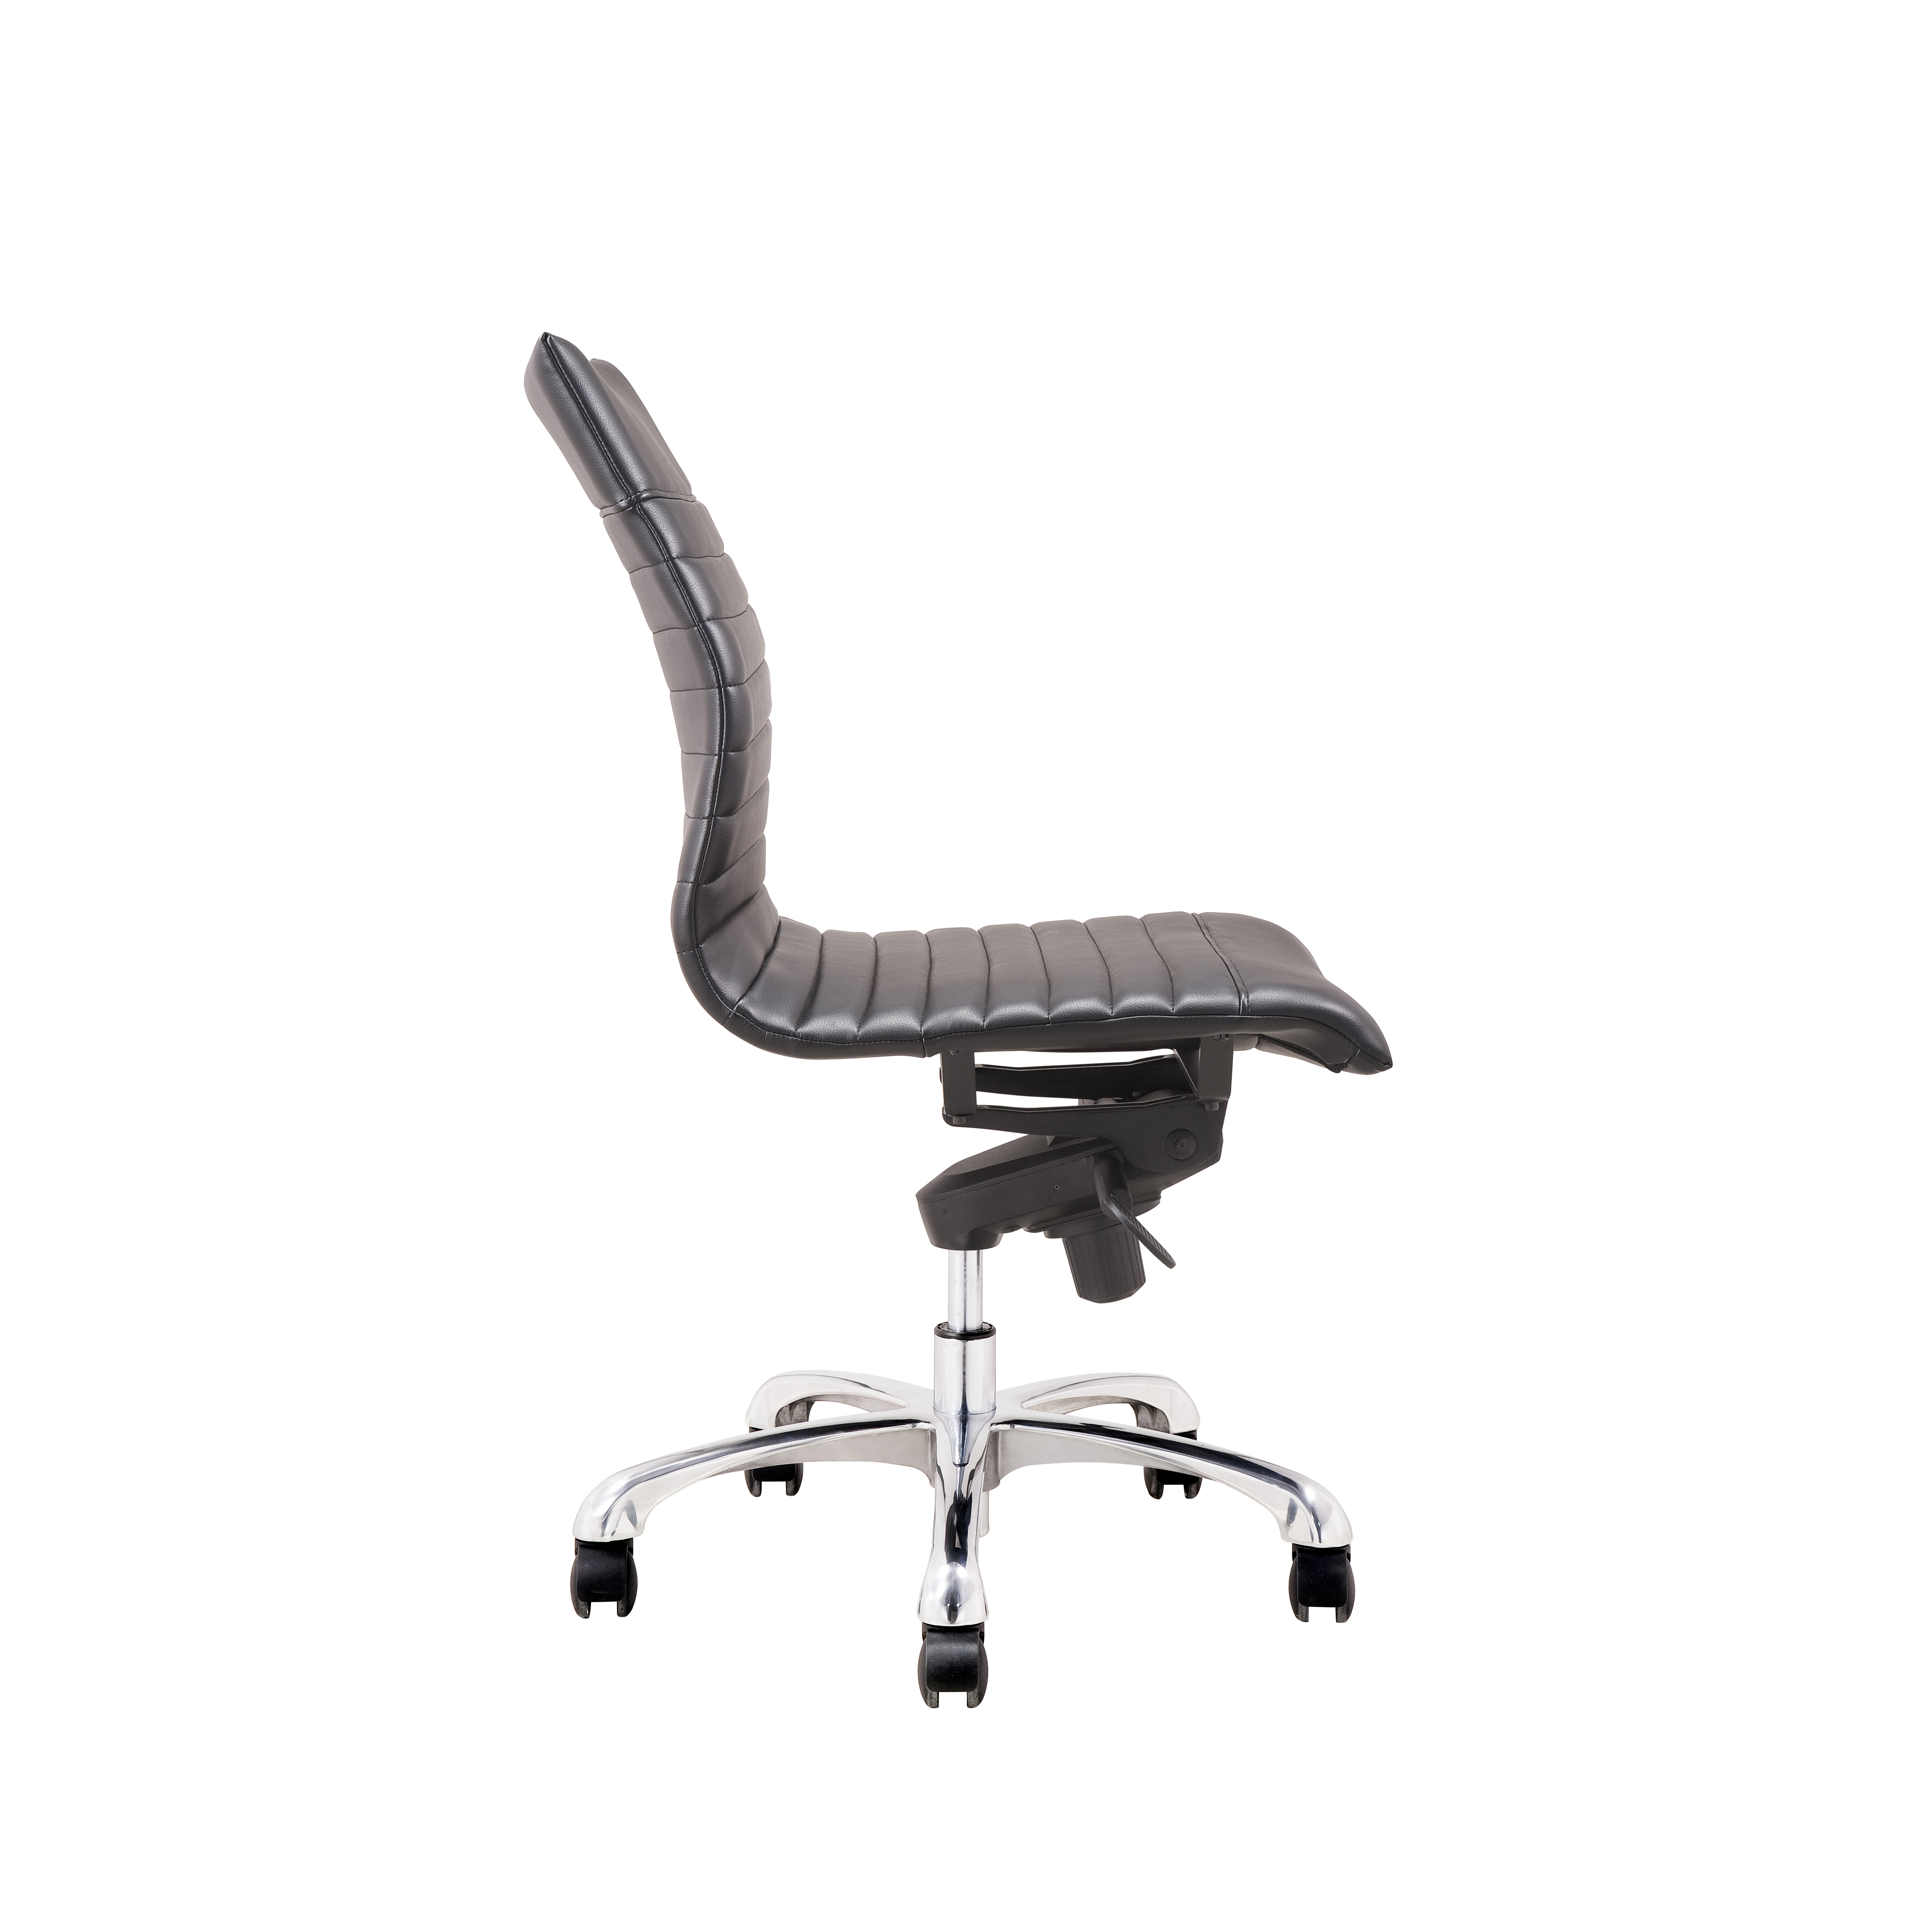 custom office chair, china office chair supplier, office chair odm factory, custom upholstered office chair, custom leather office chair